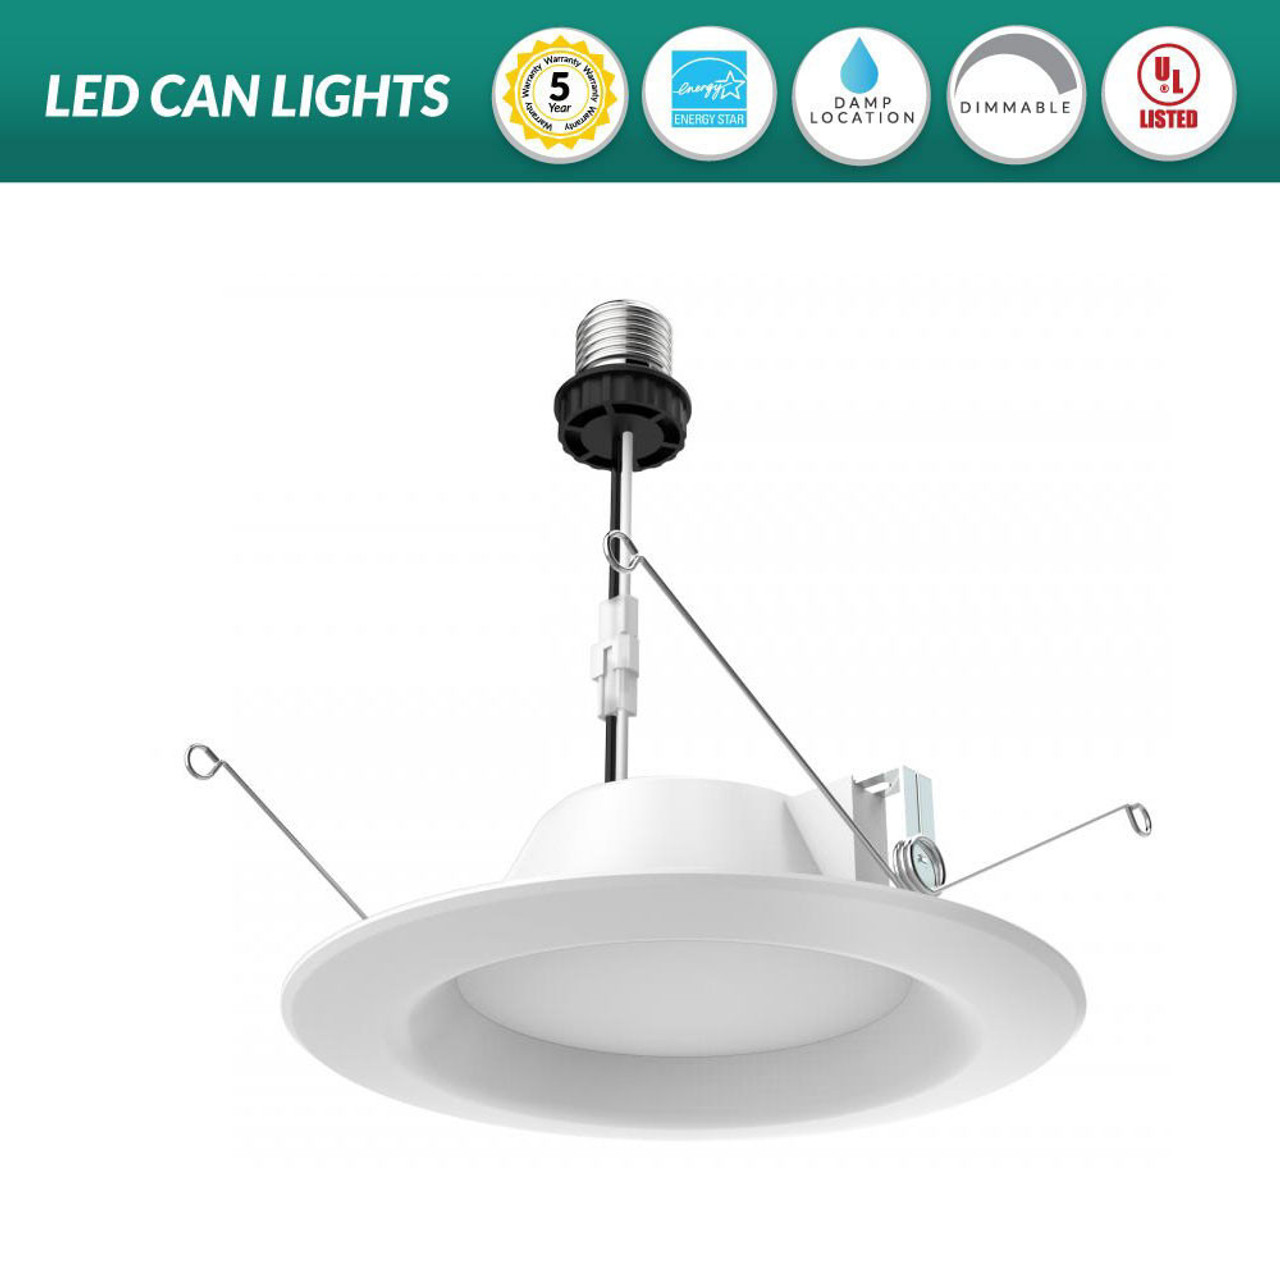 LED Recessed Downlight Fixtures